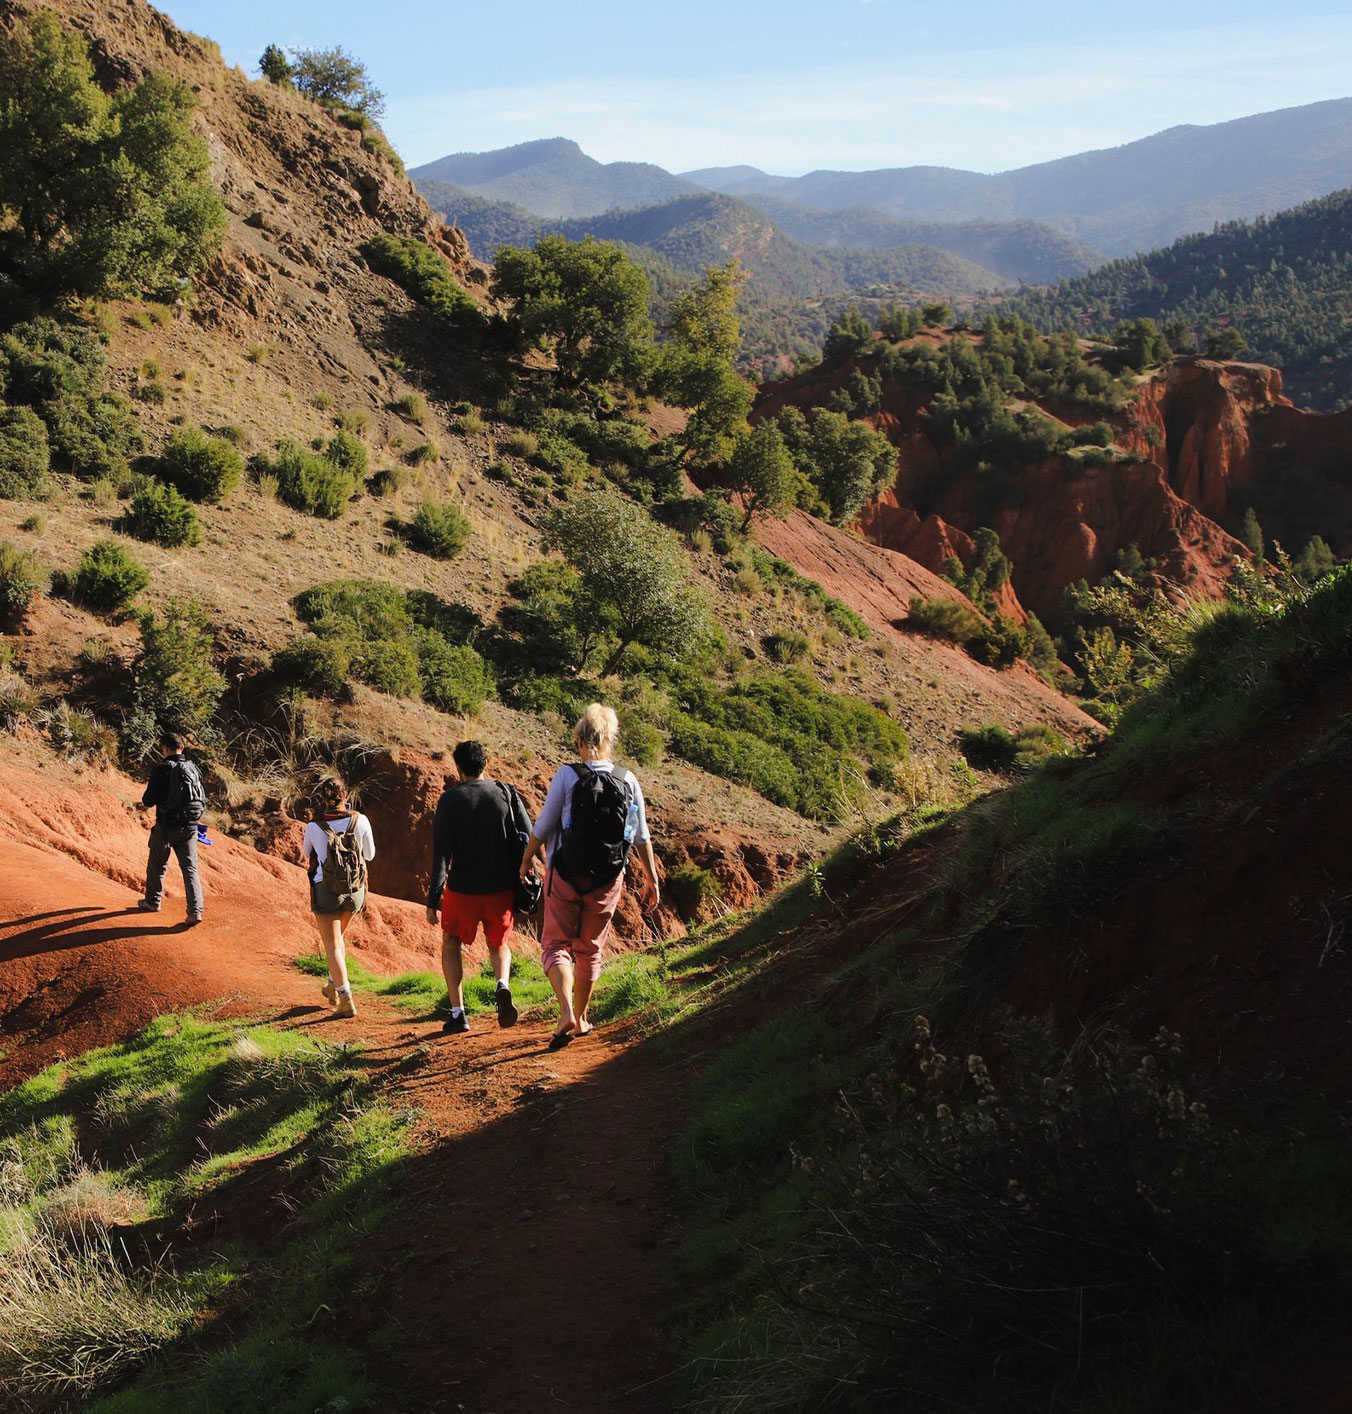 Revitalise your mind and body in the Atlas Mountains